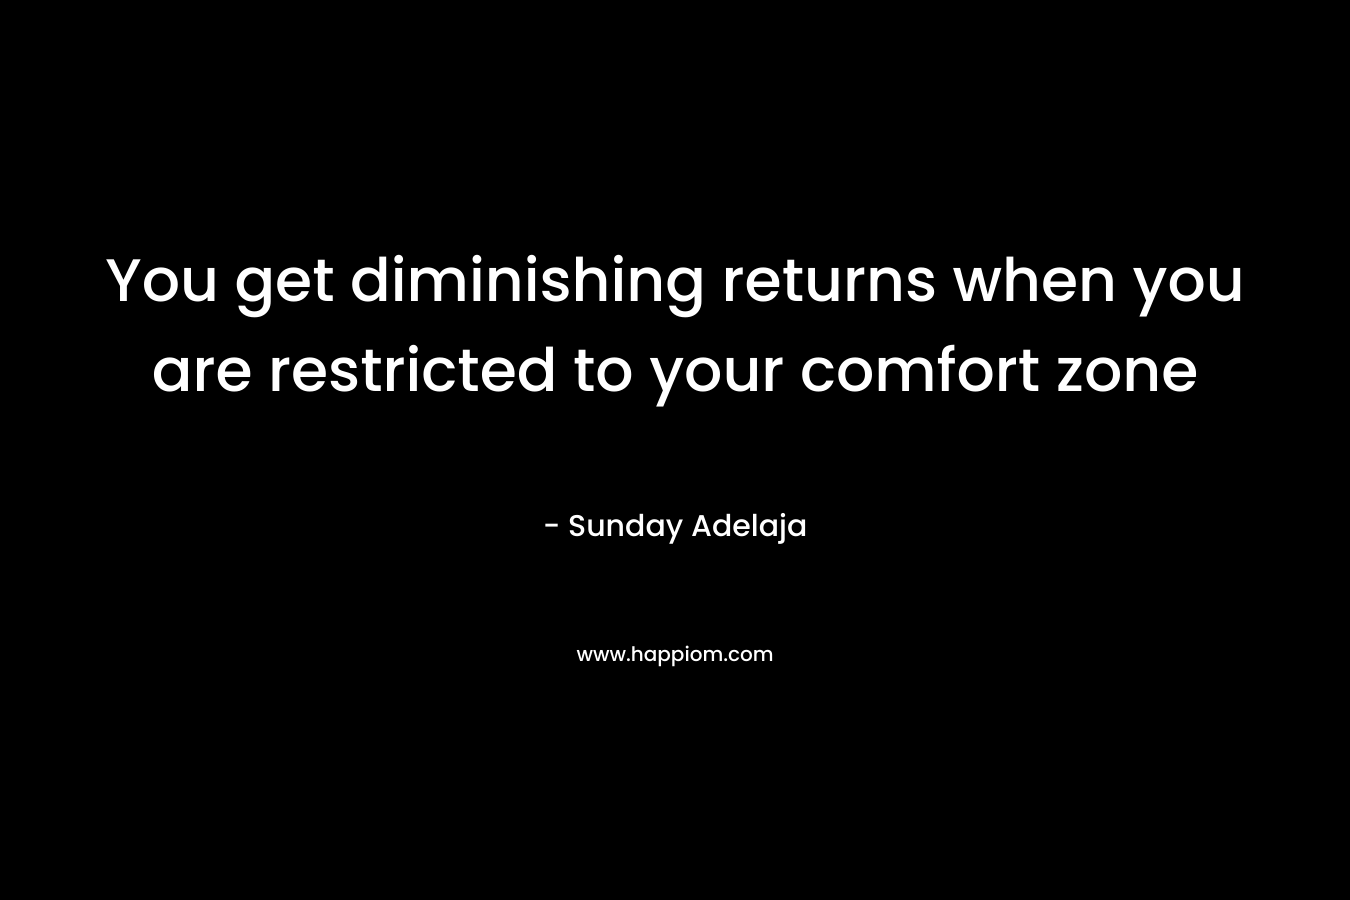 You get diminishing returns when you are restricted to your comfort zone